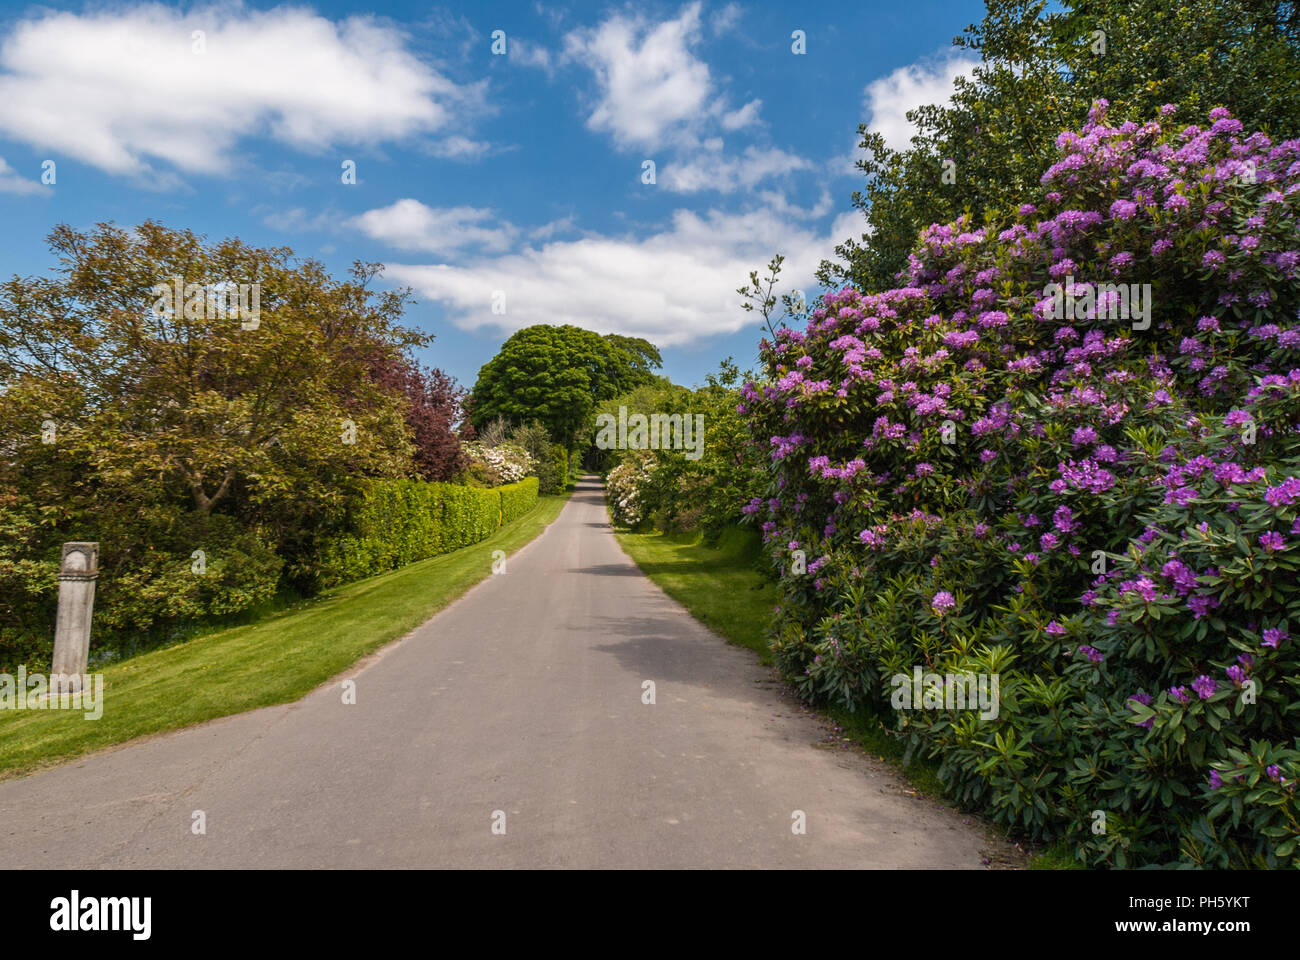 Edinburgh, Scotland, UK - June 14, 2012: Rural road with green borders and flowers under blue sky with white clouds in Dalmany House back country Stock Photo